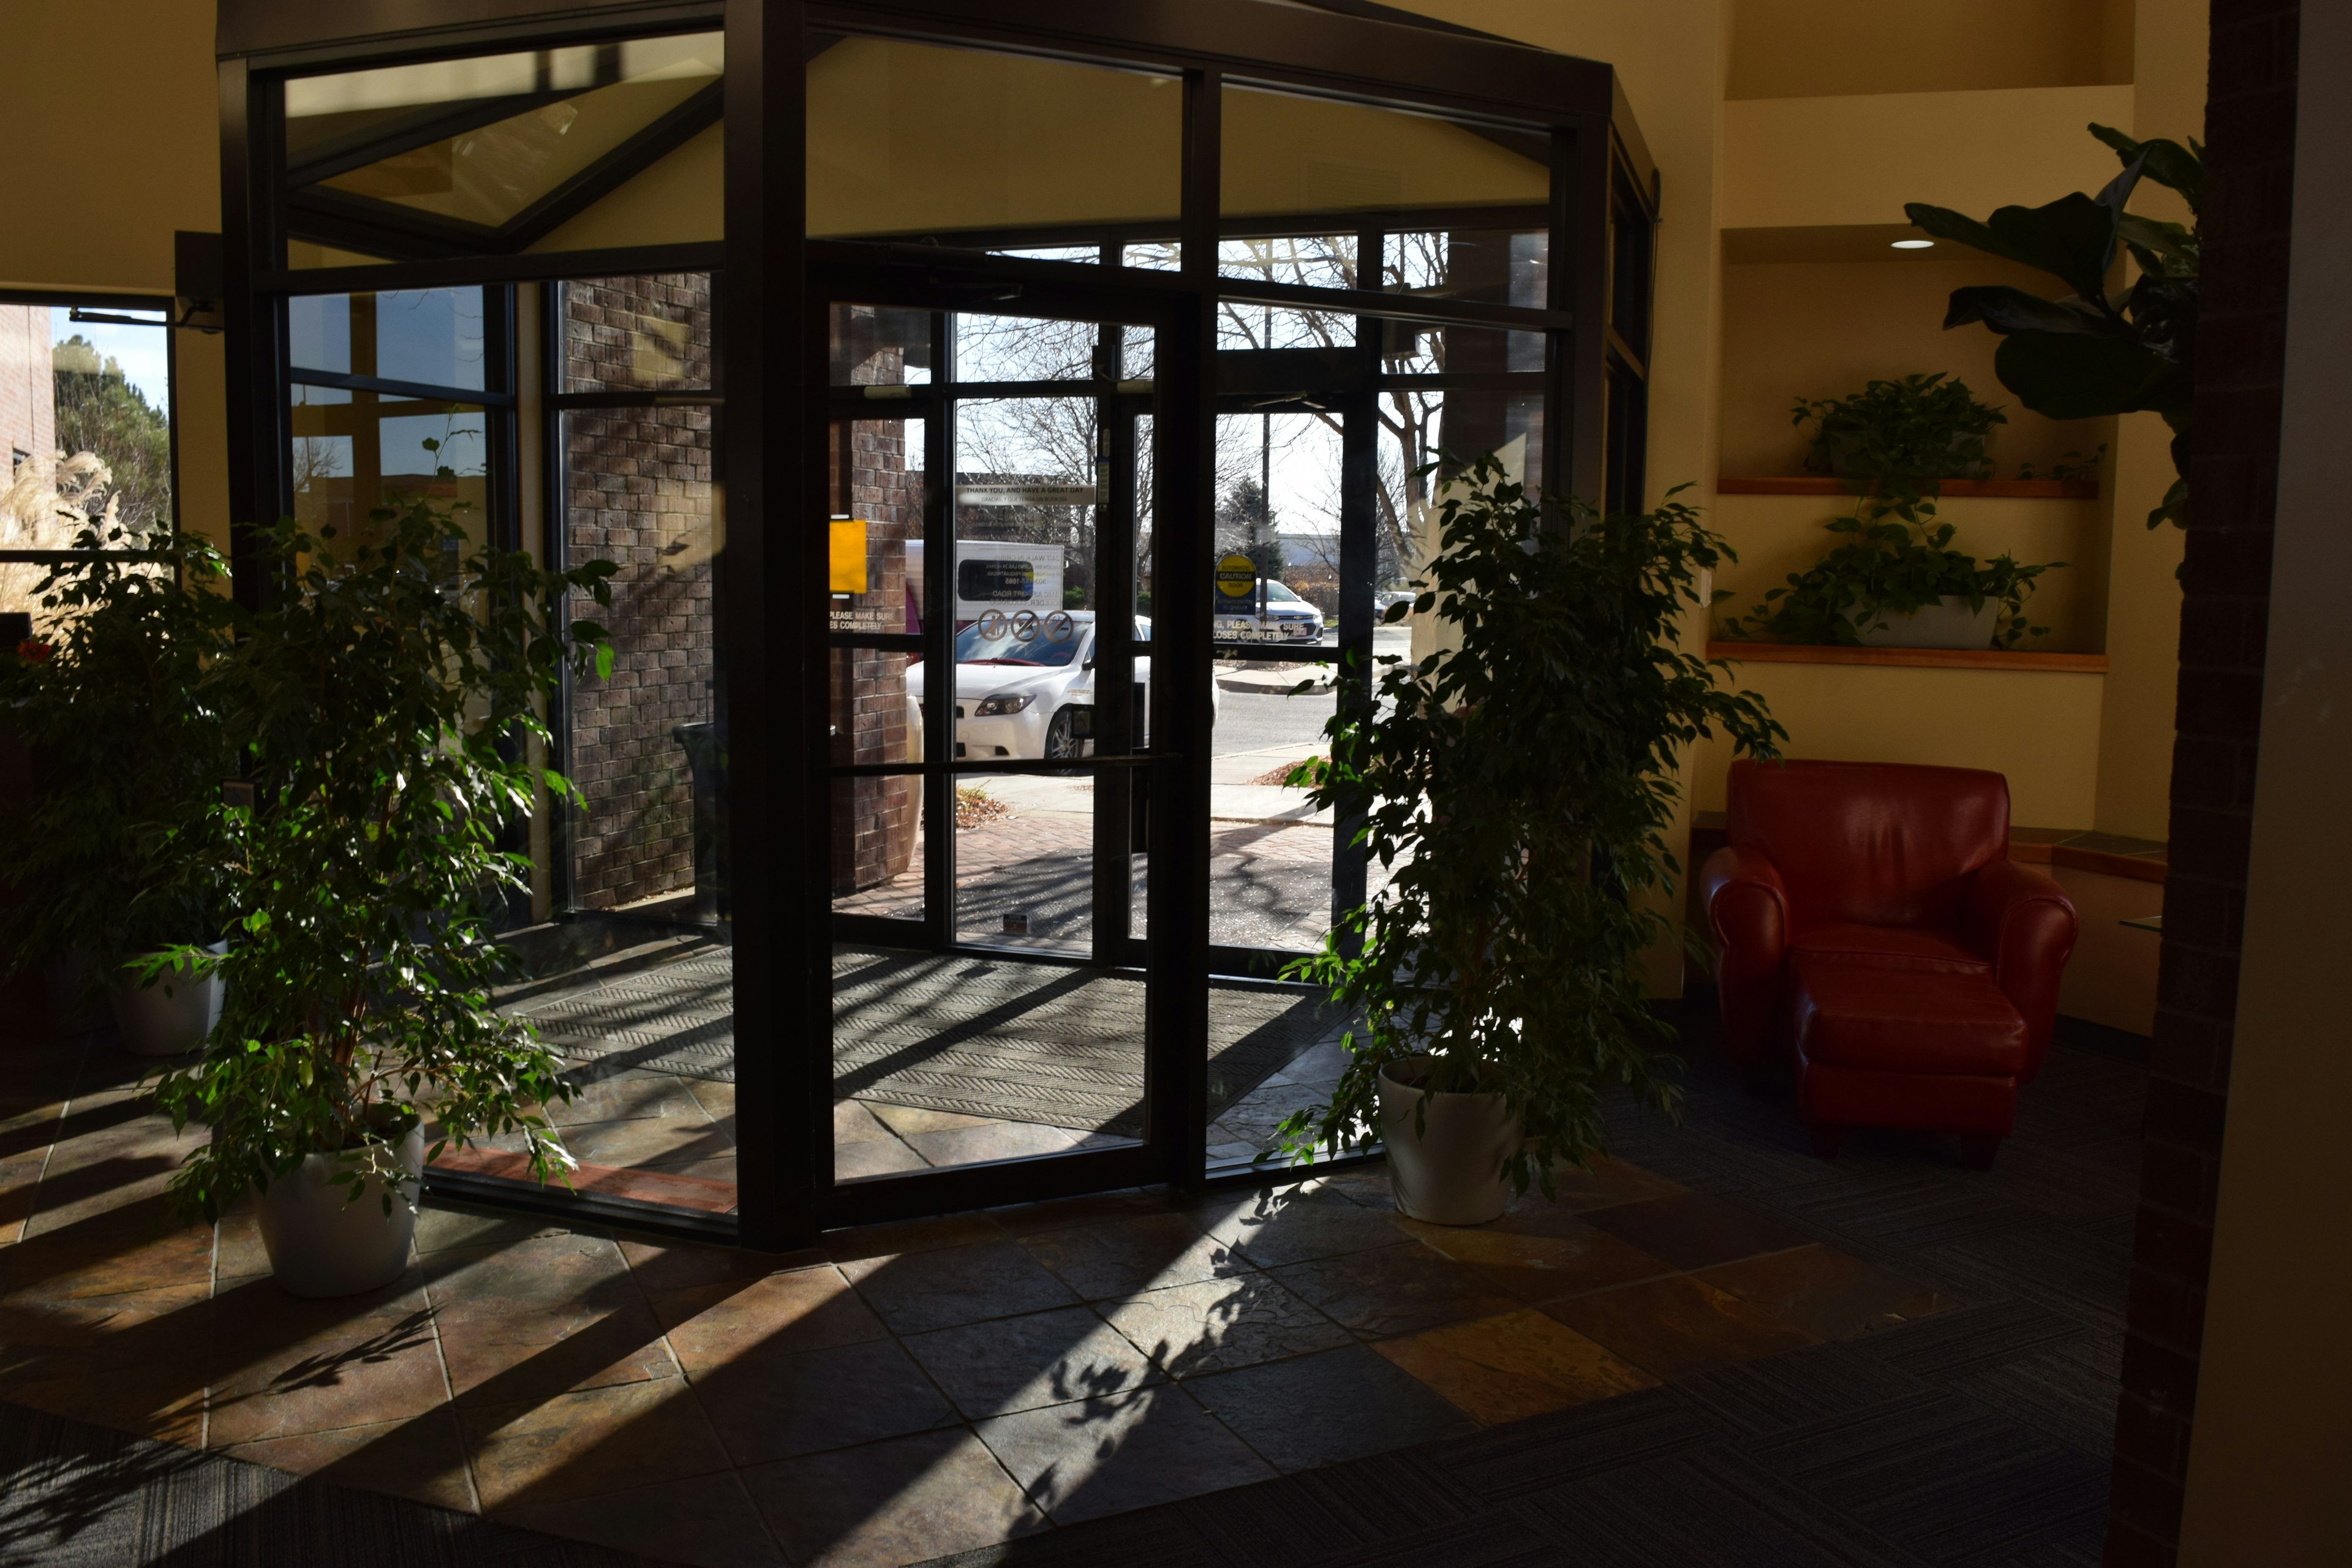 Inside of entry lobby to Dixon. Glass front doors, houseplants, yellow painted walls, and tile flooring.